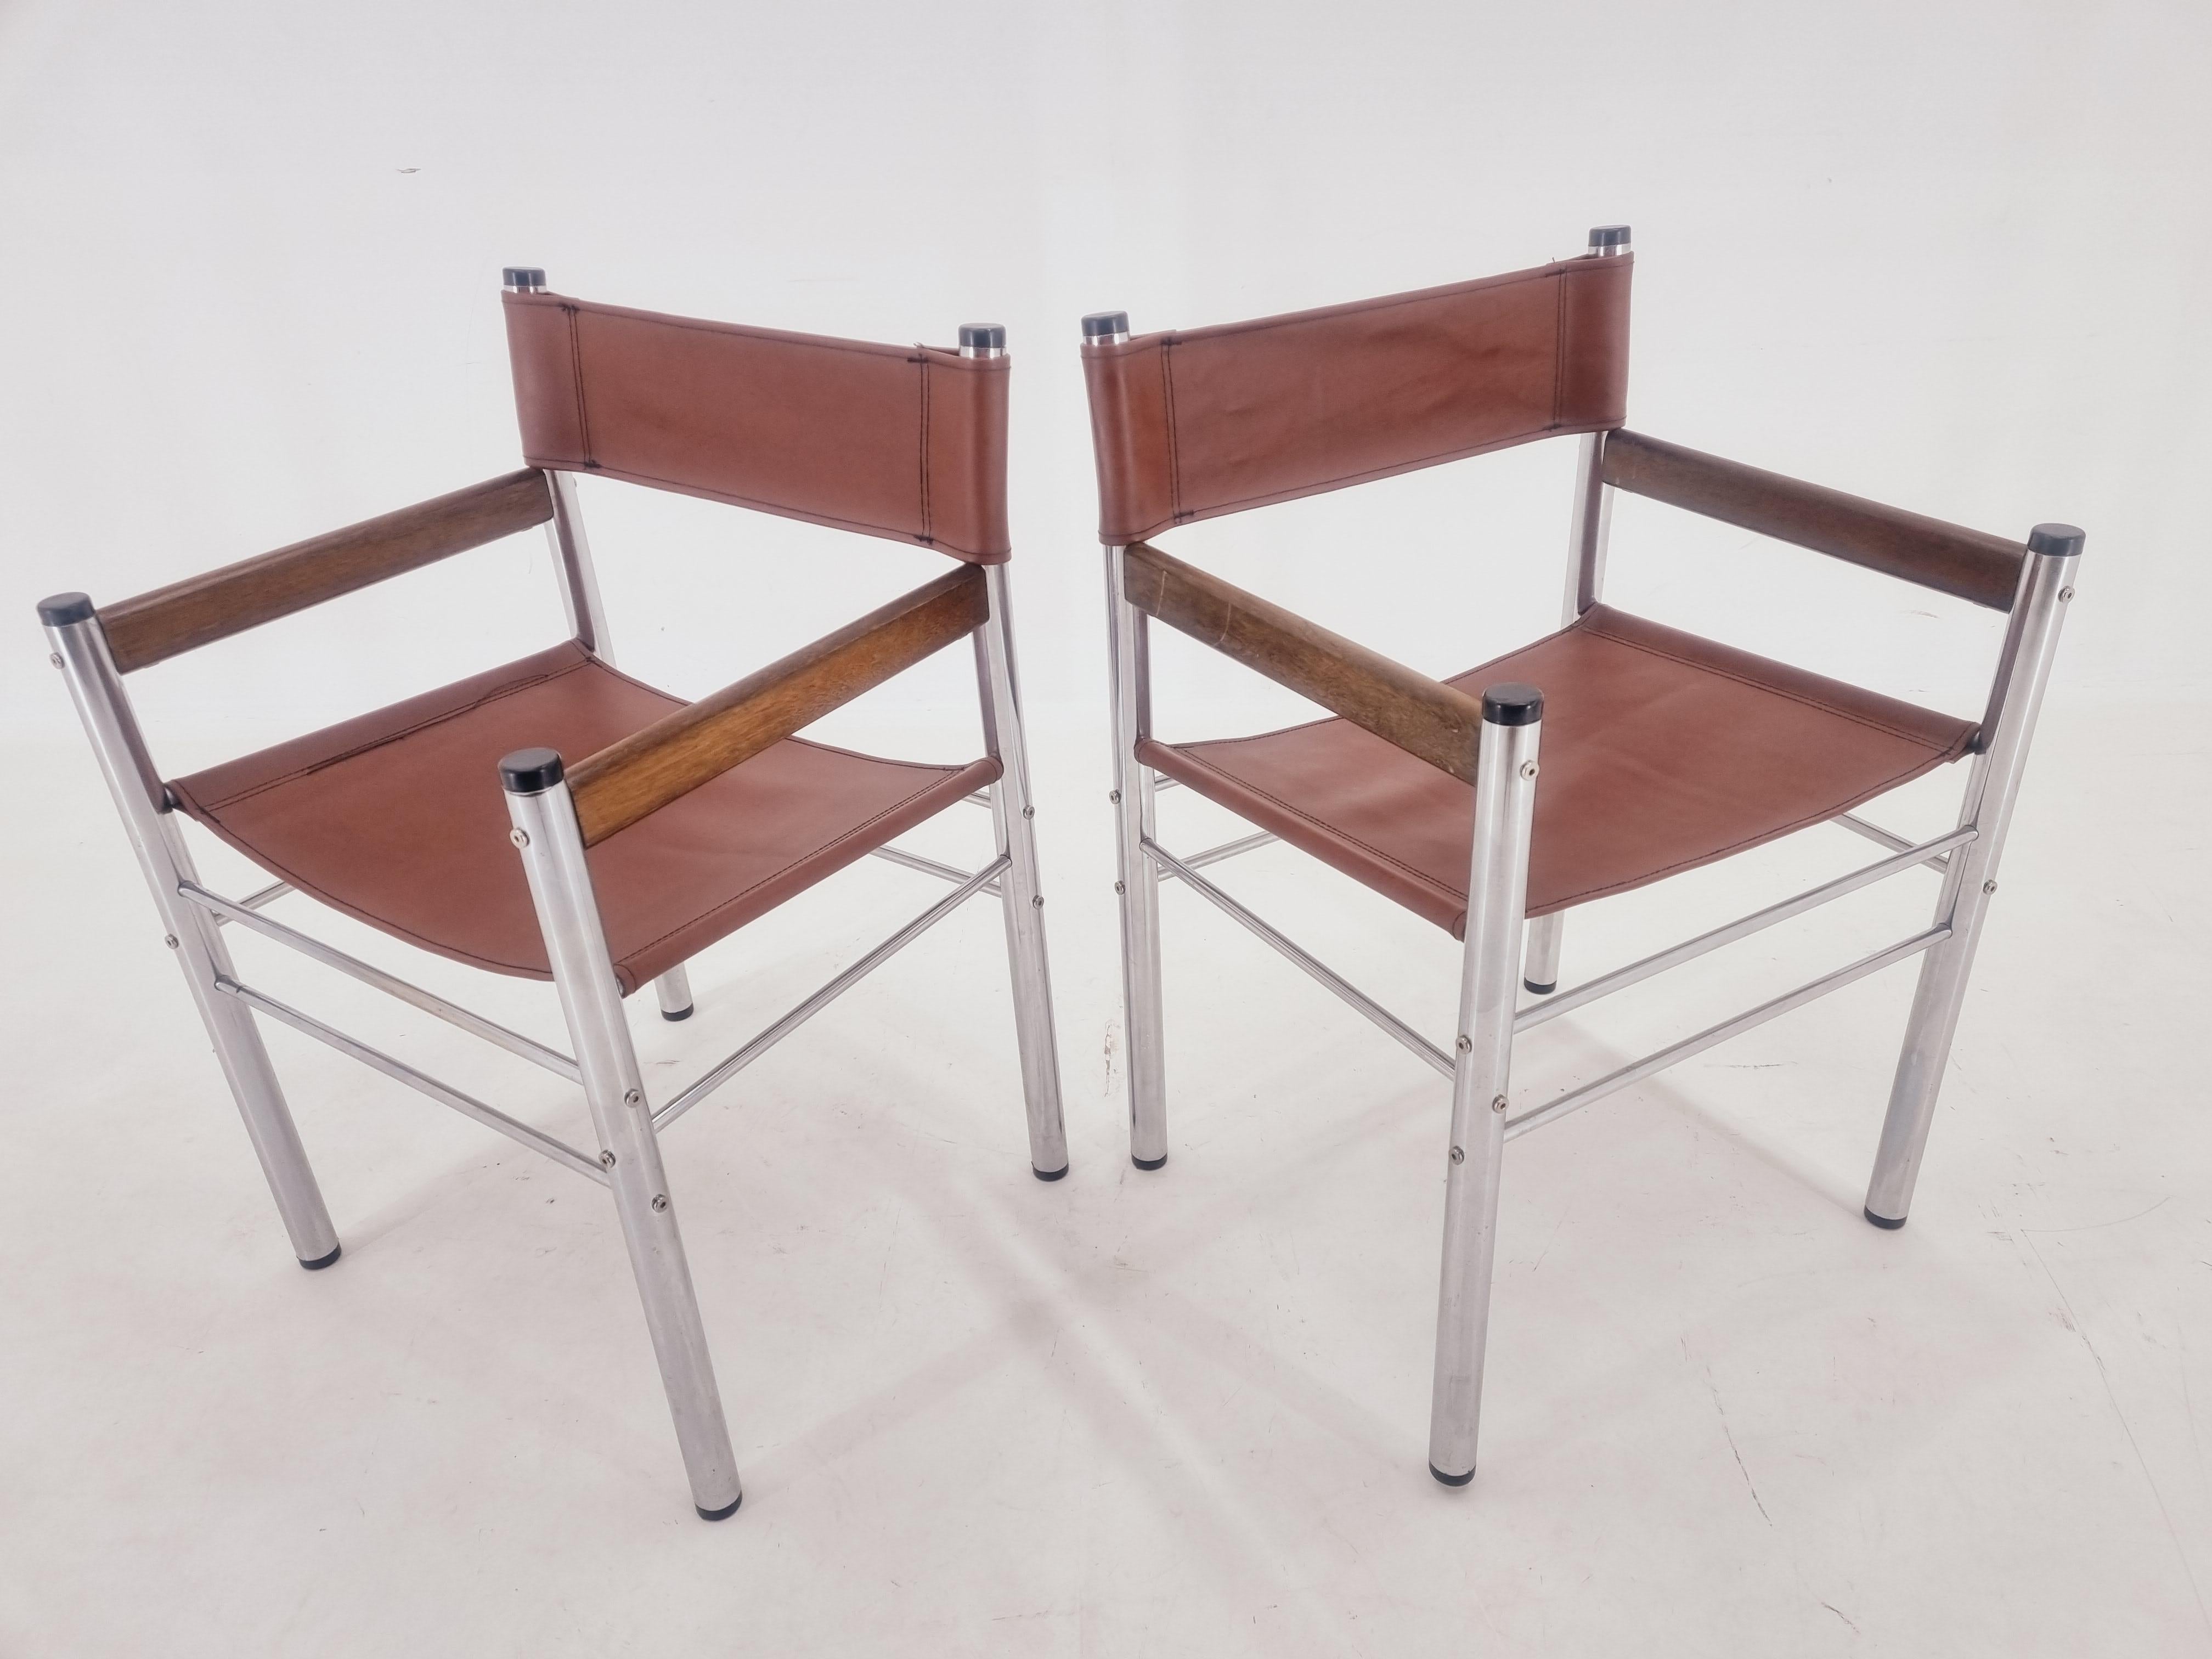 Pair of Rare Midcentury Tubular Design Armchairs, Germany, 1970s For Sale 5